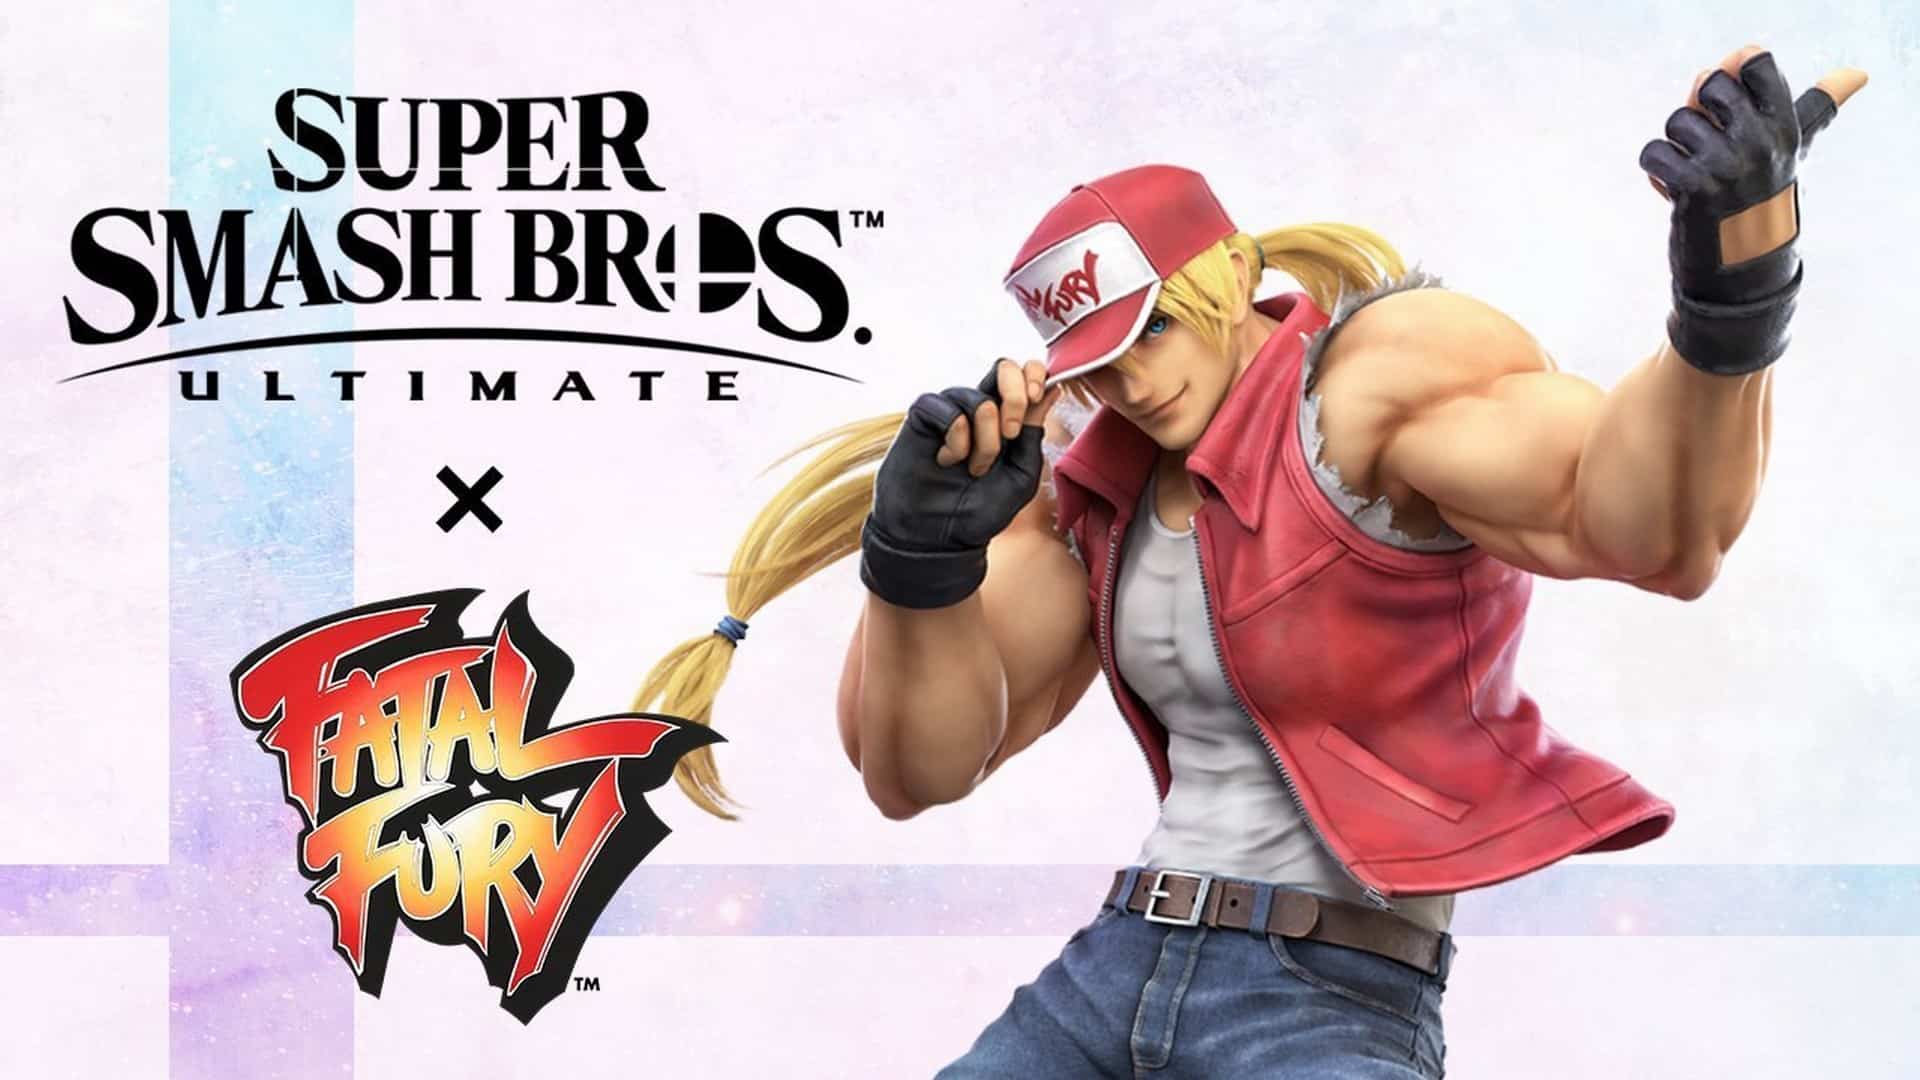 Terry Bogard From The Fatal Fury Series Joins Super Smash Bros Ultimate